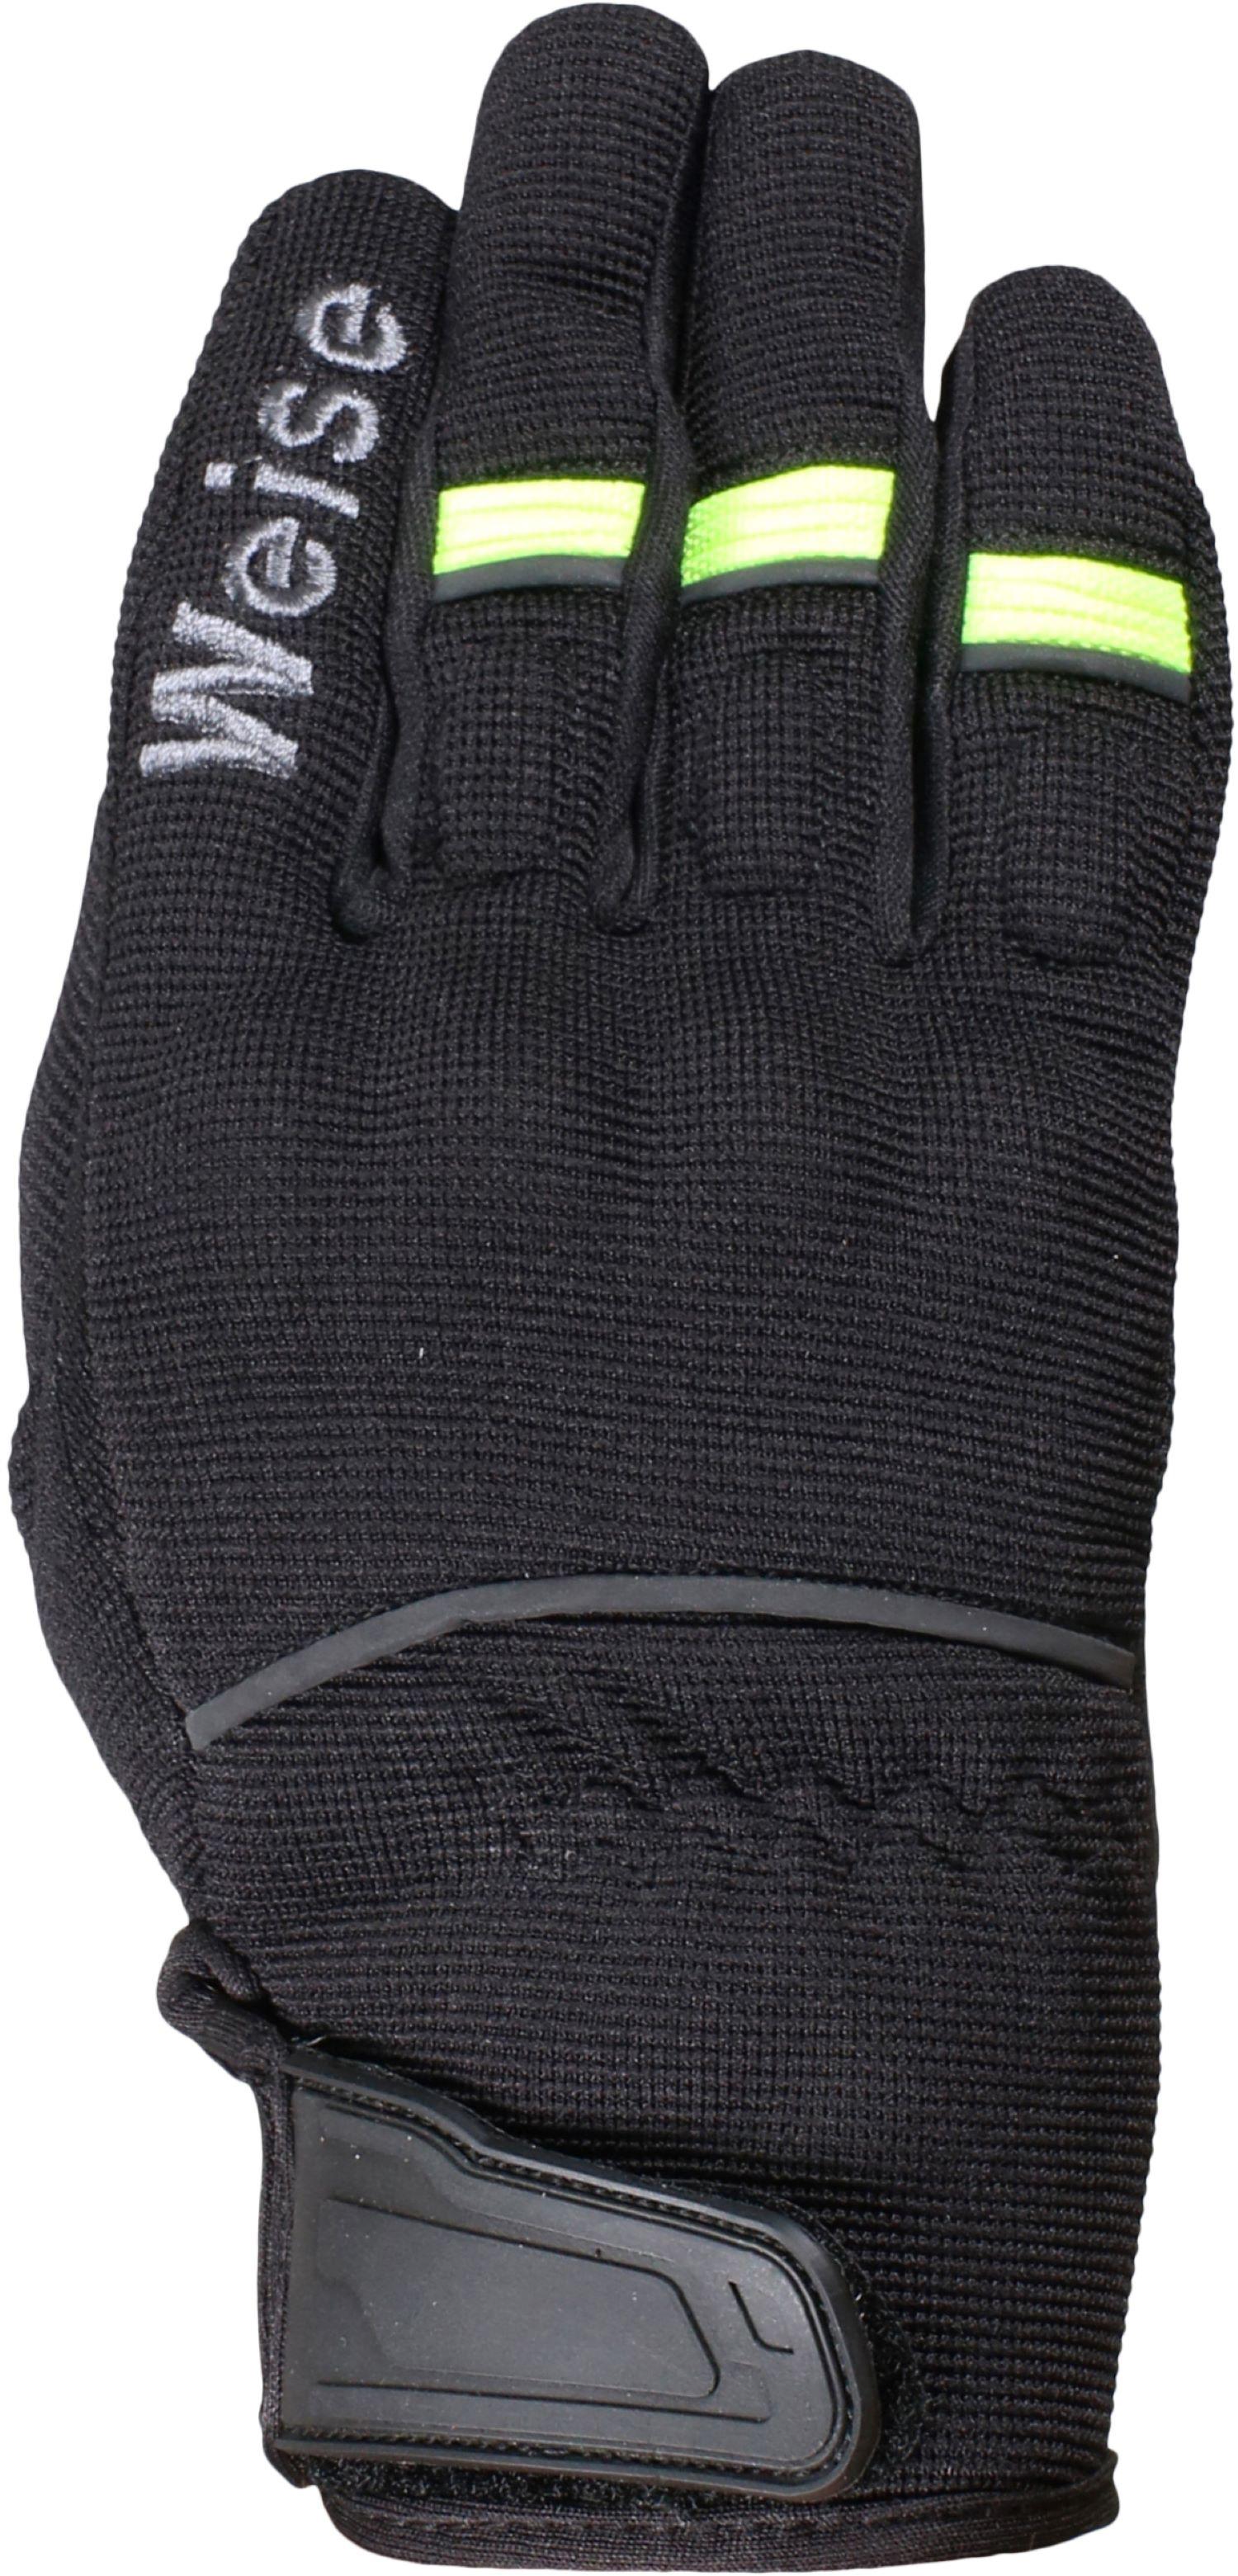 Weise Motorcycle Pit Gloves - Black/Neon, S